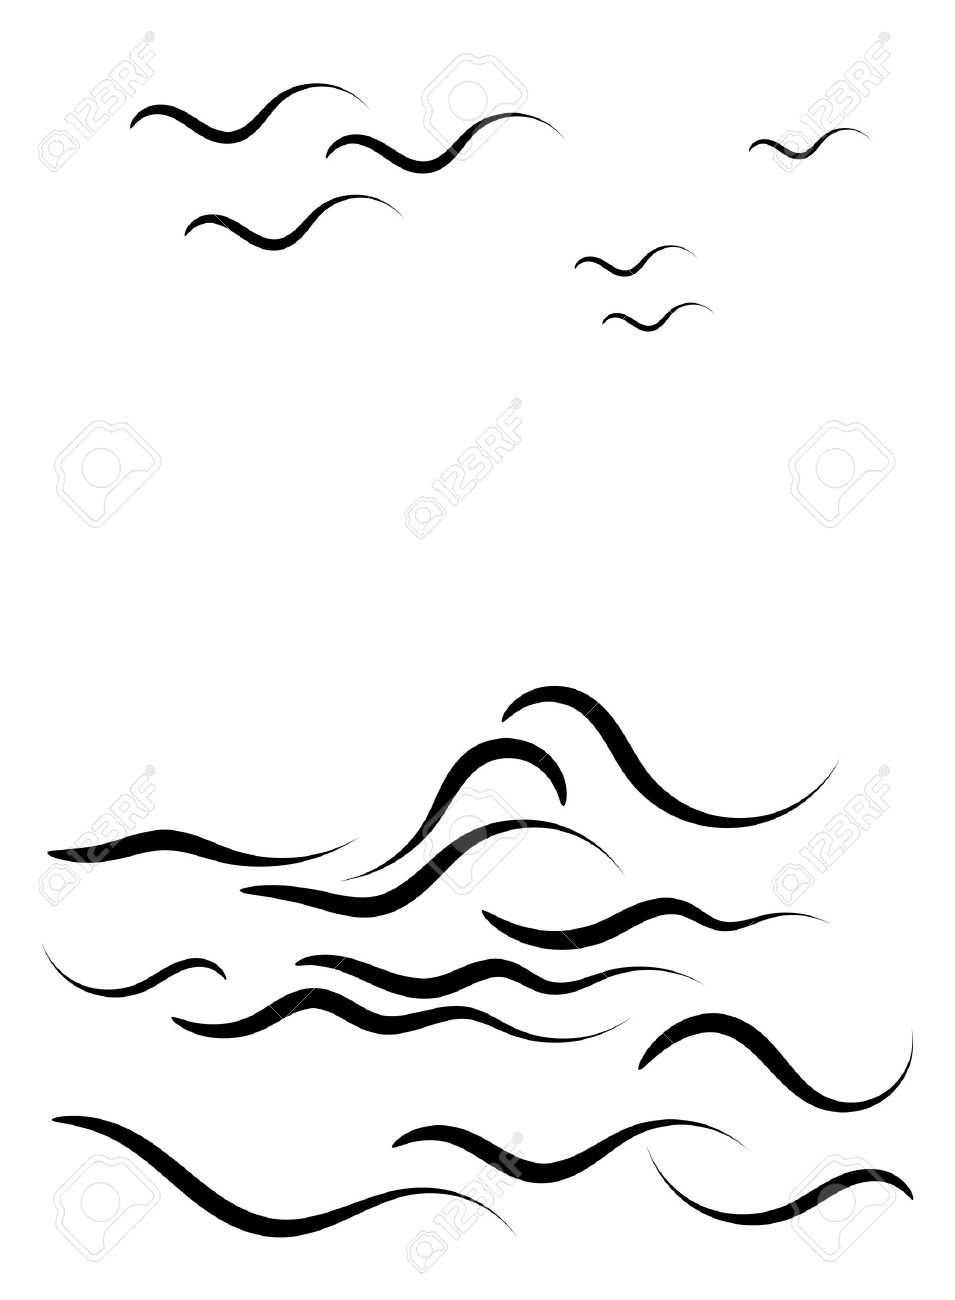 Ocean clipart black and white, Ocean black and white Transparent FREE